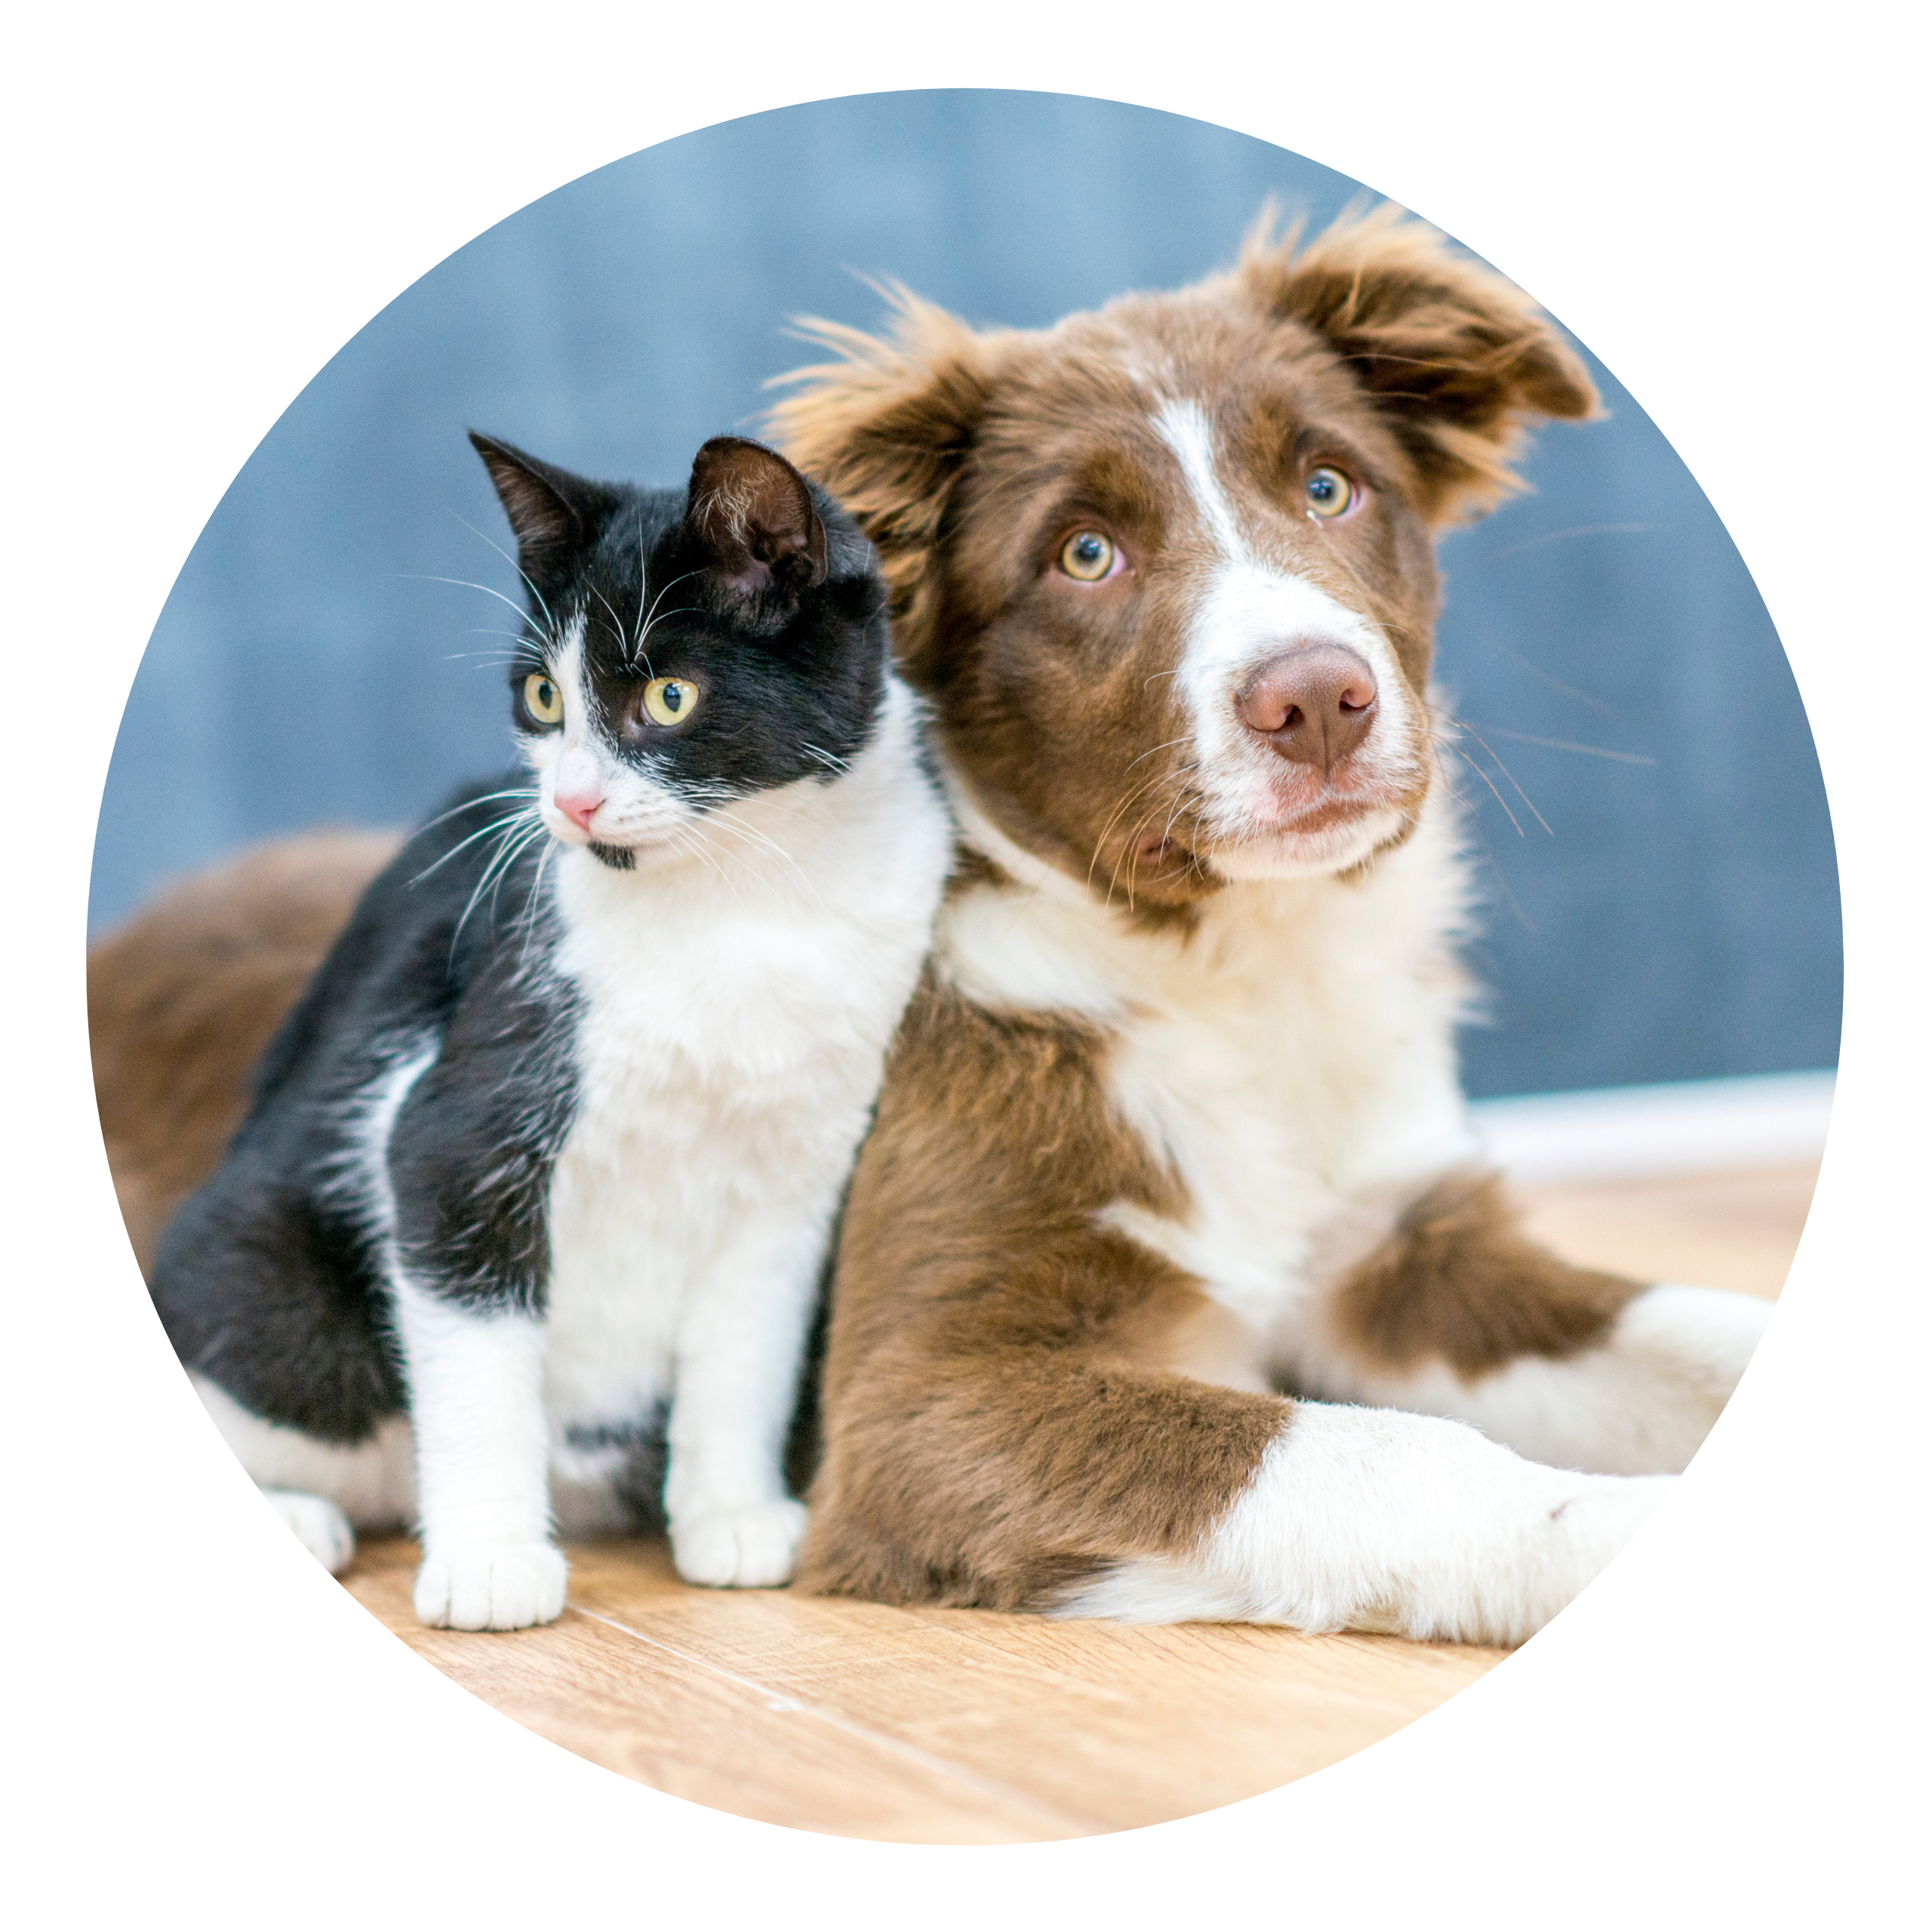 An image of black and white cat sitting with a brown kelpie dog